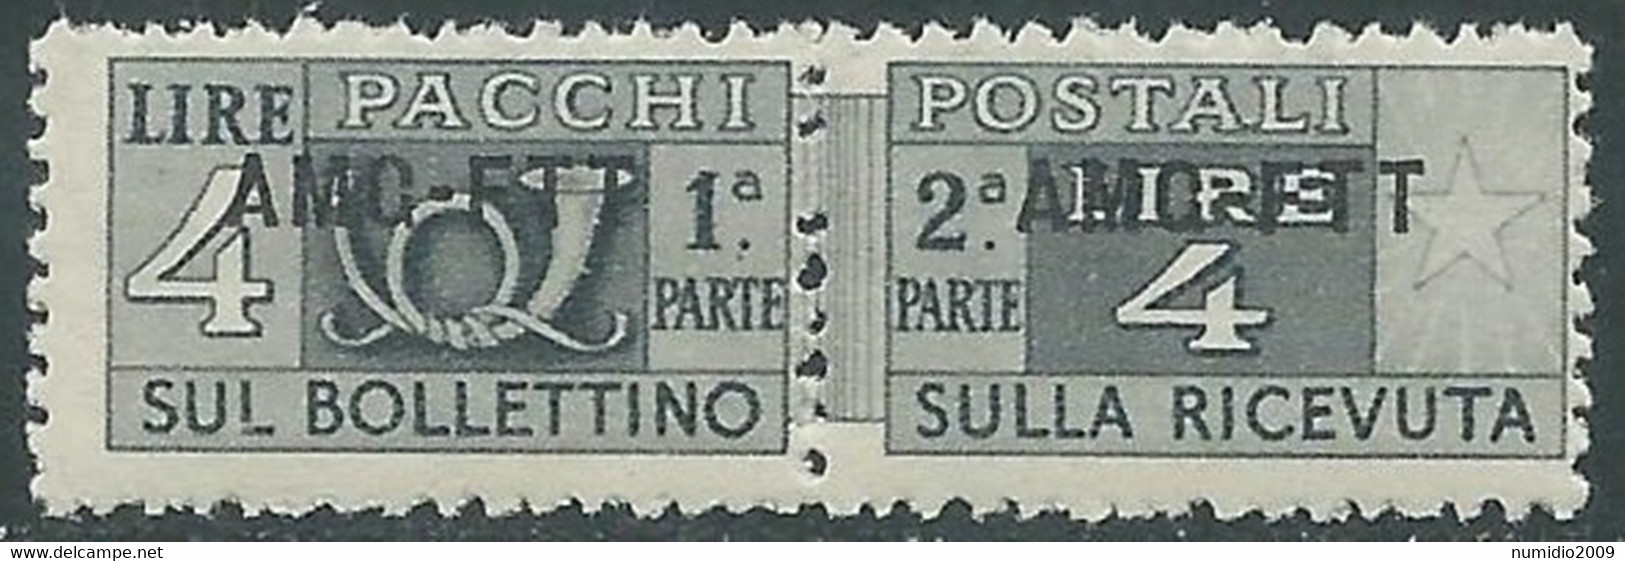 1949-53 TRIESTE A PACCHI POSTALI 4 LIRE MNH ** - RE24-6 - Postal And Consigned Parcels